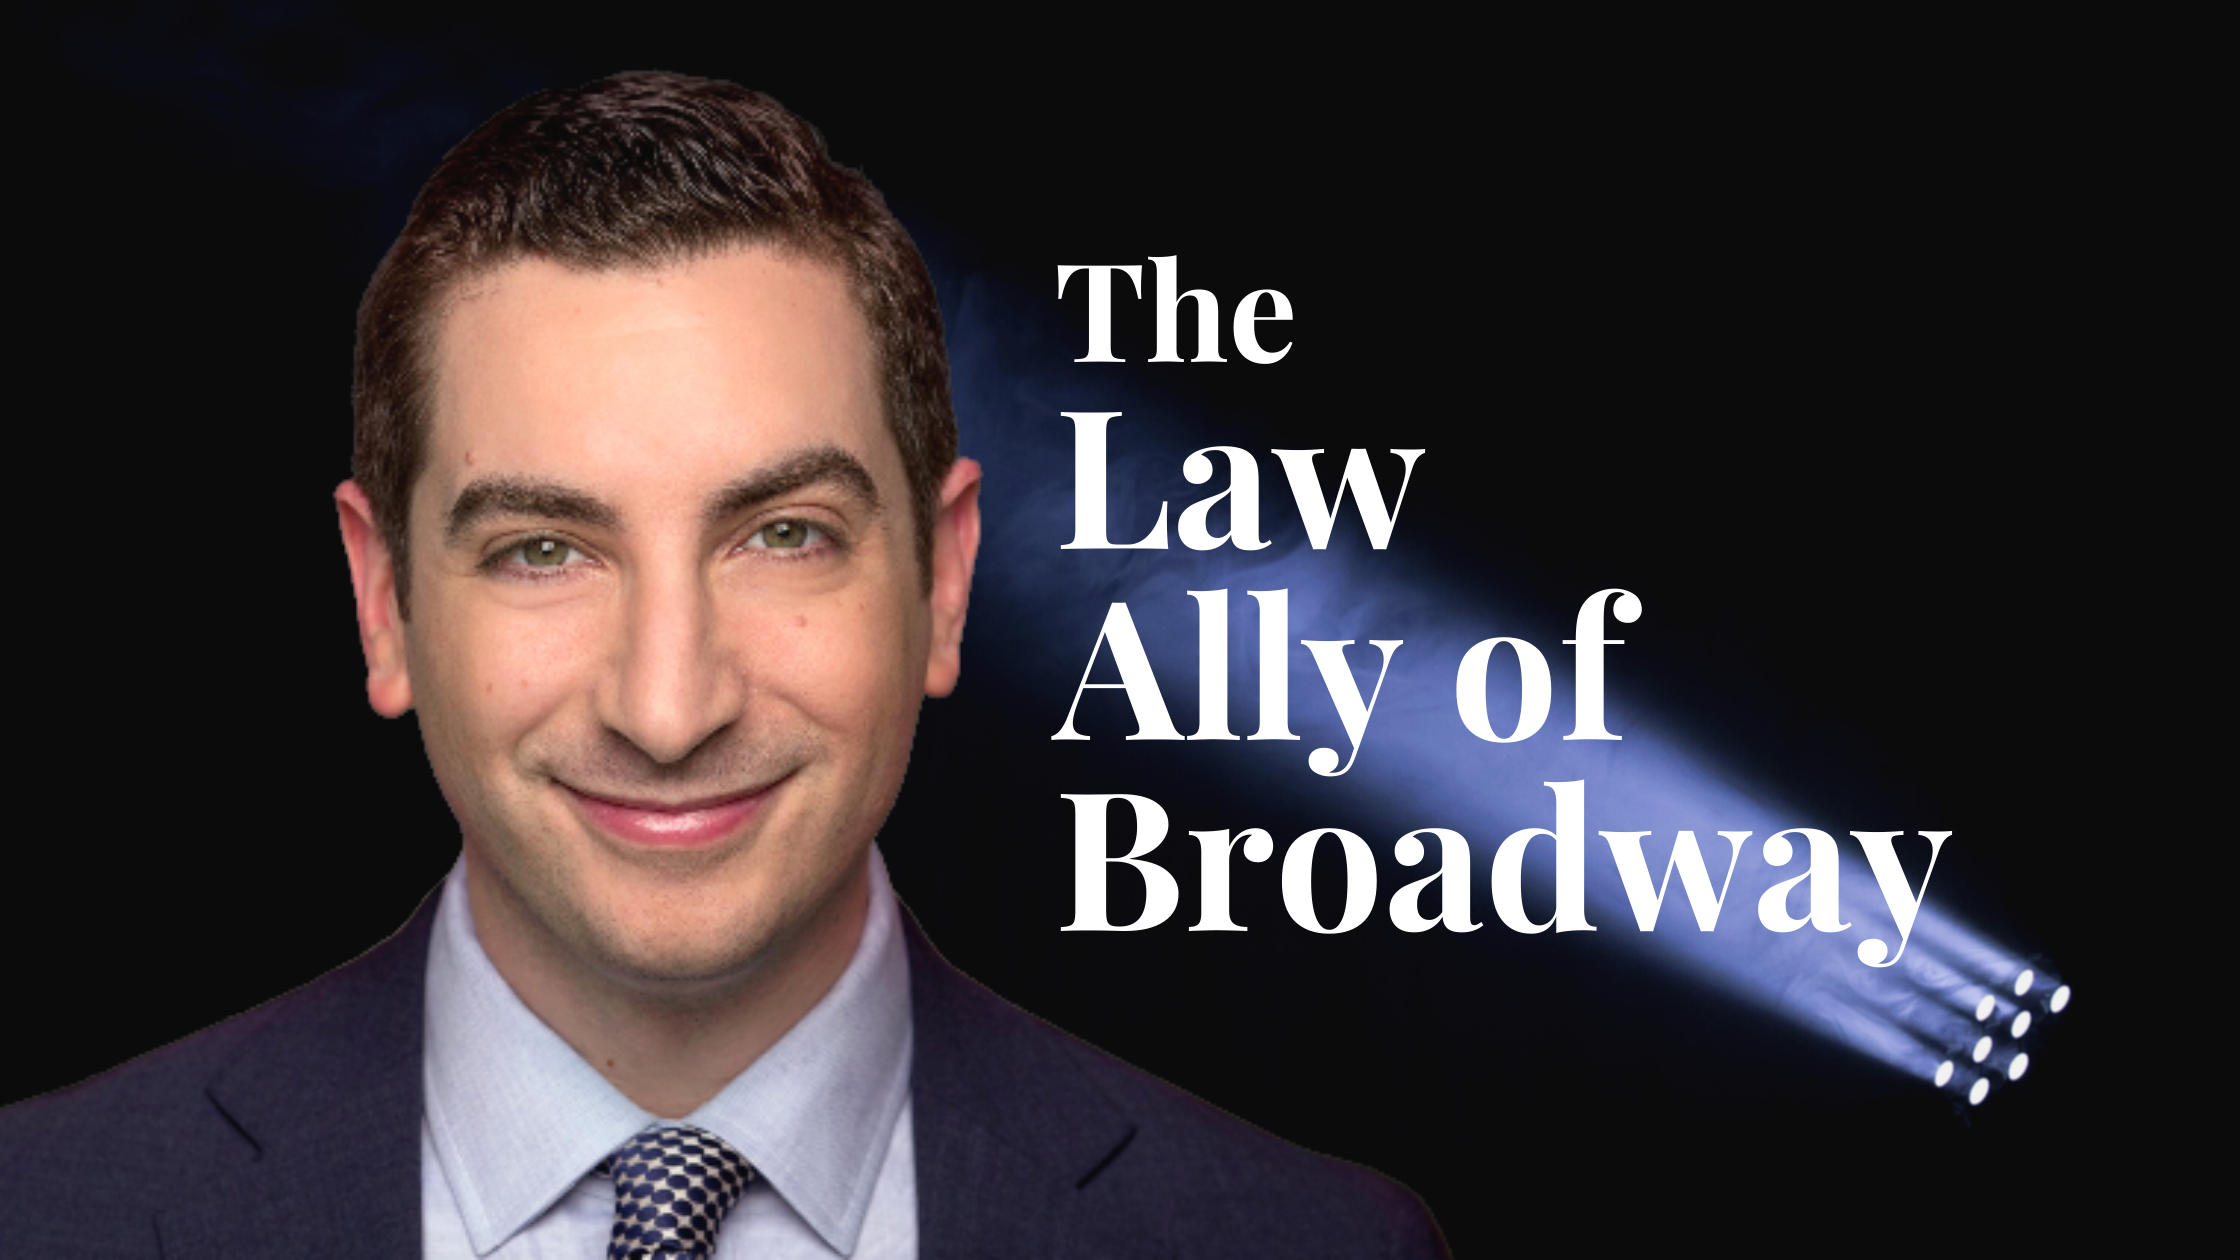 Ethan Krasnoo Is the Law Ally of Broadway